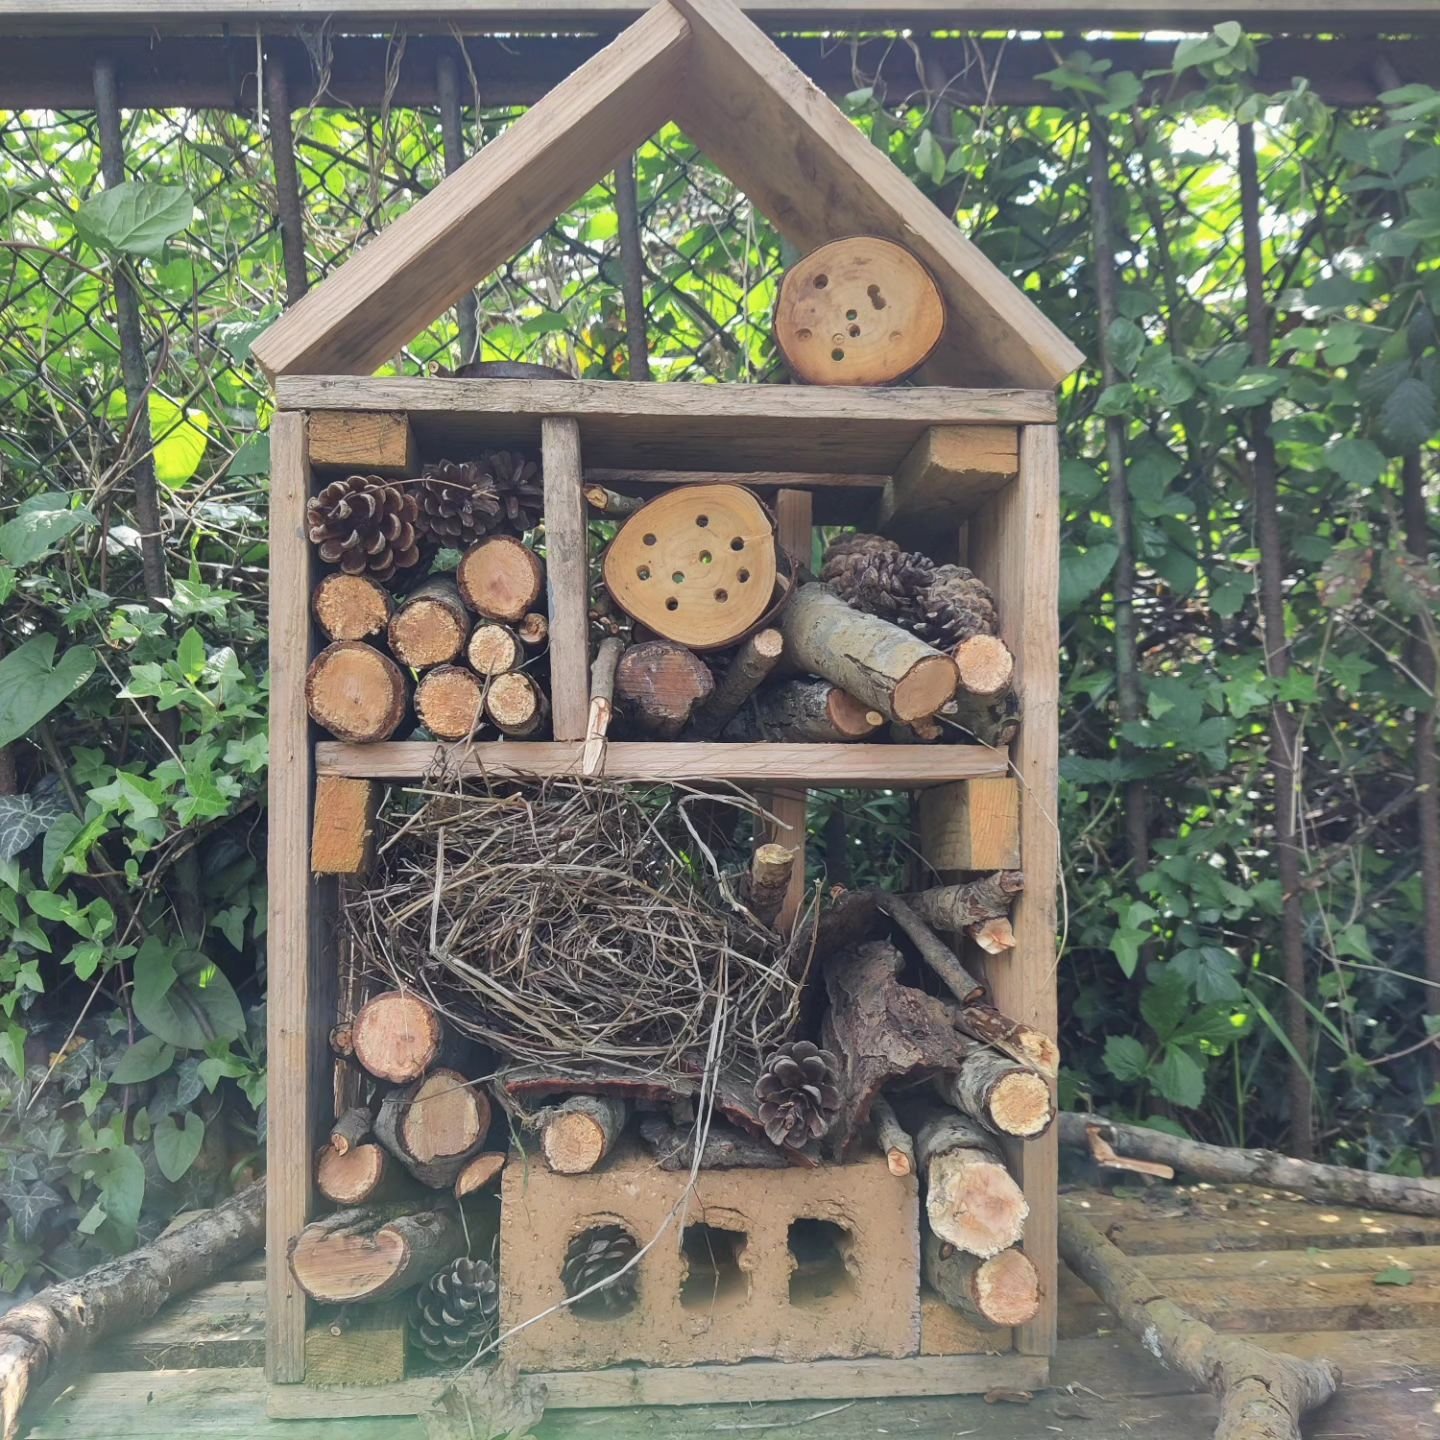 The Grand Bug-apest Hotel and glamping is open for business. 

#bughotel #bugsnug #forestschool